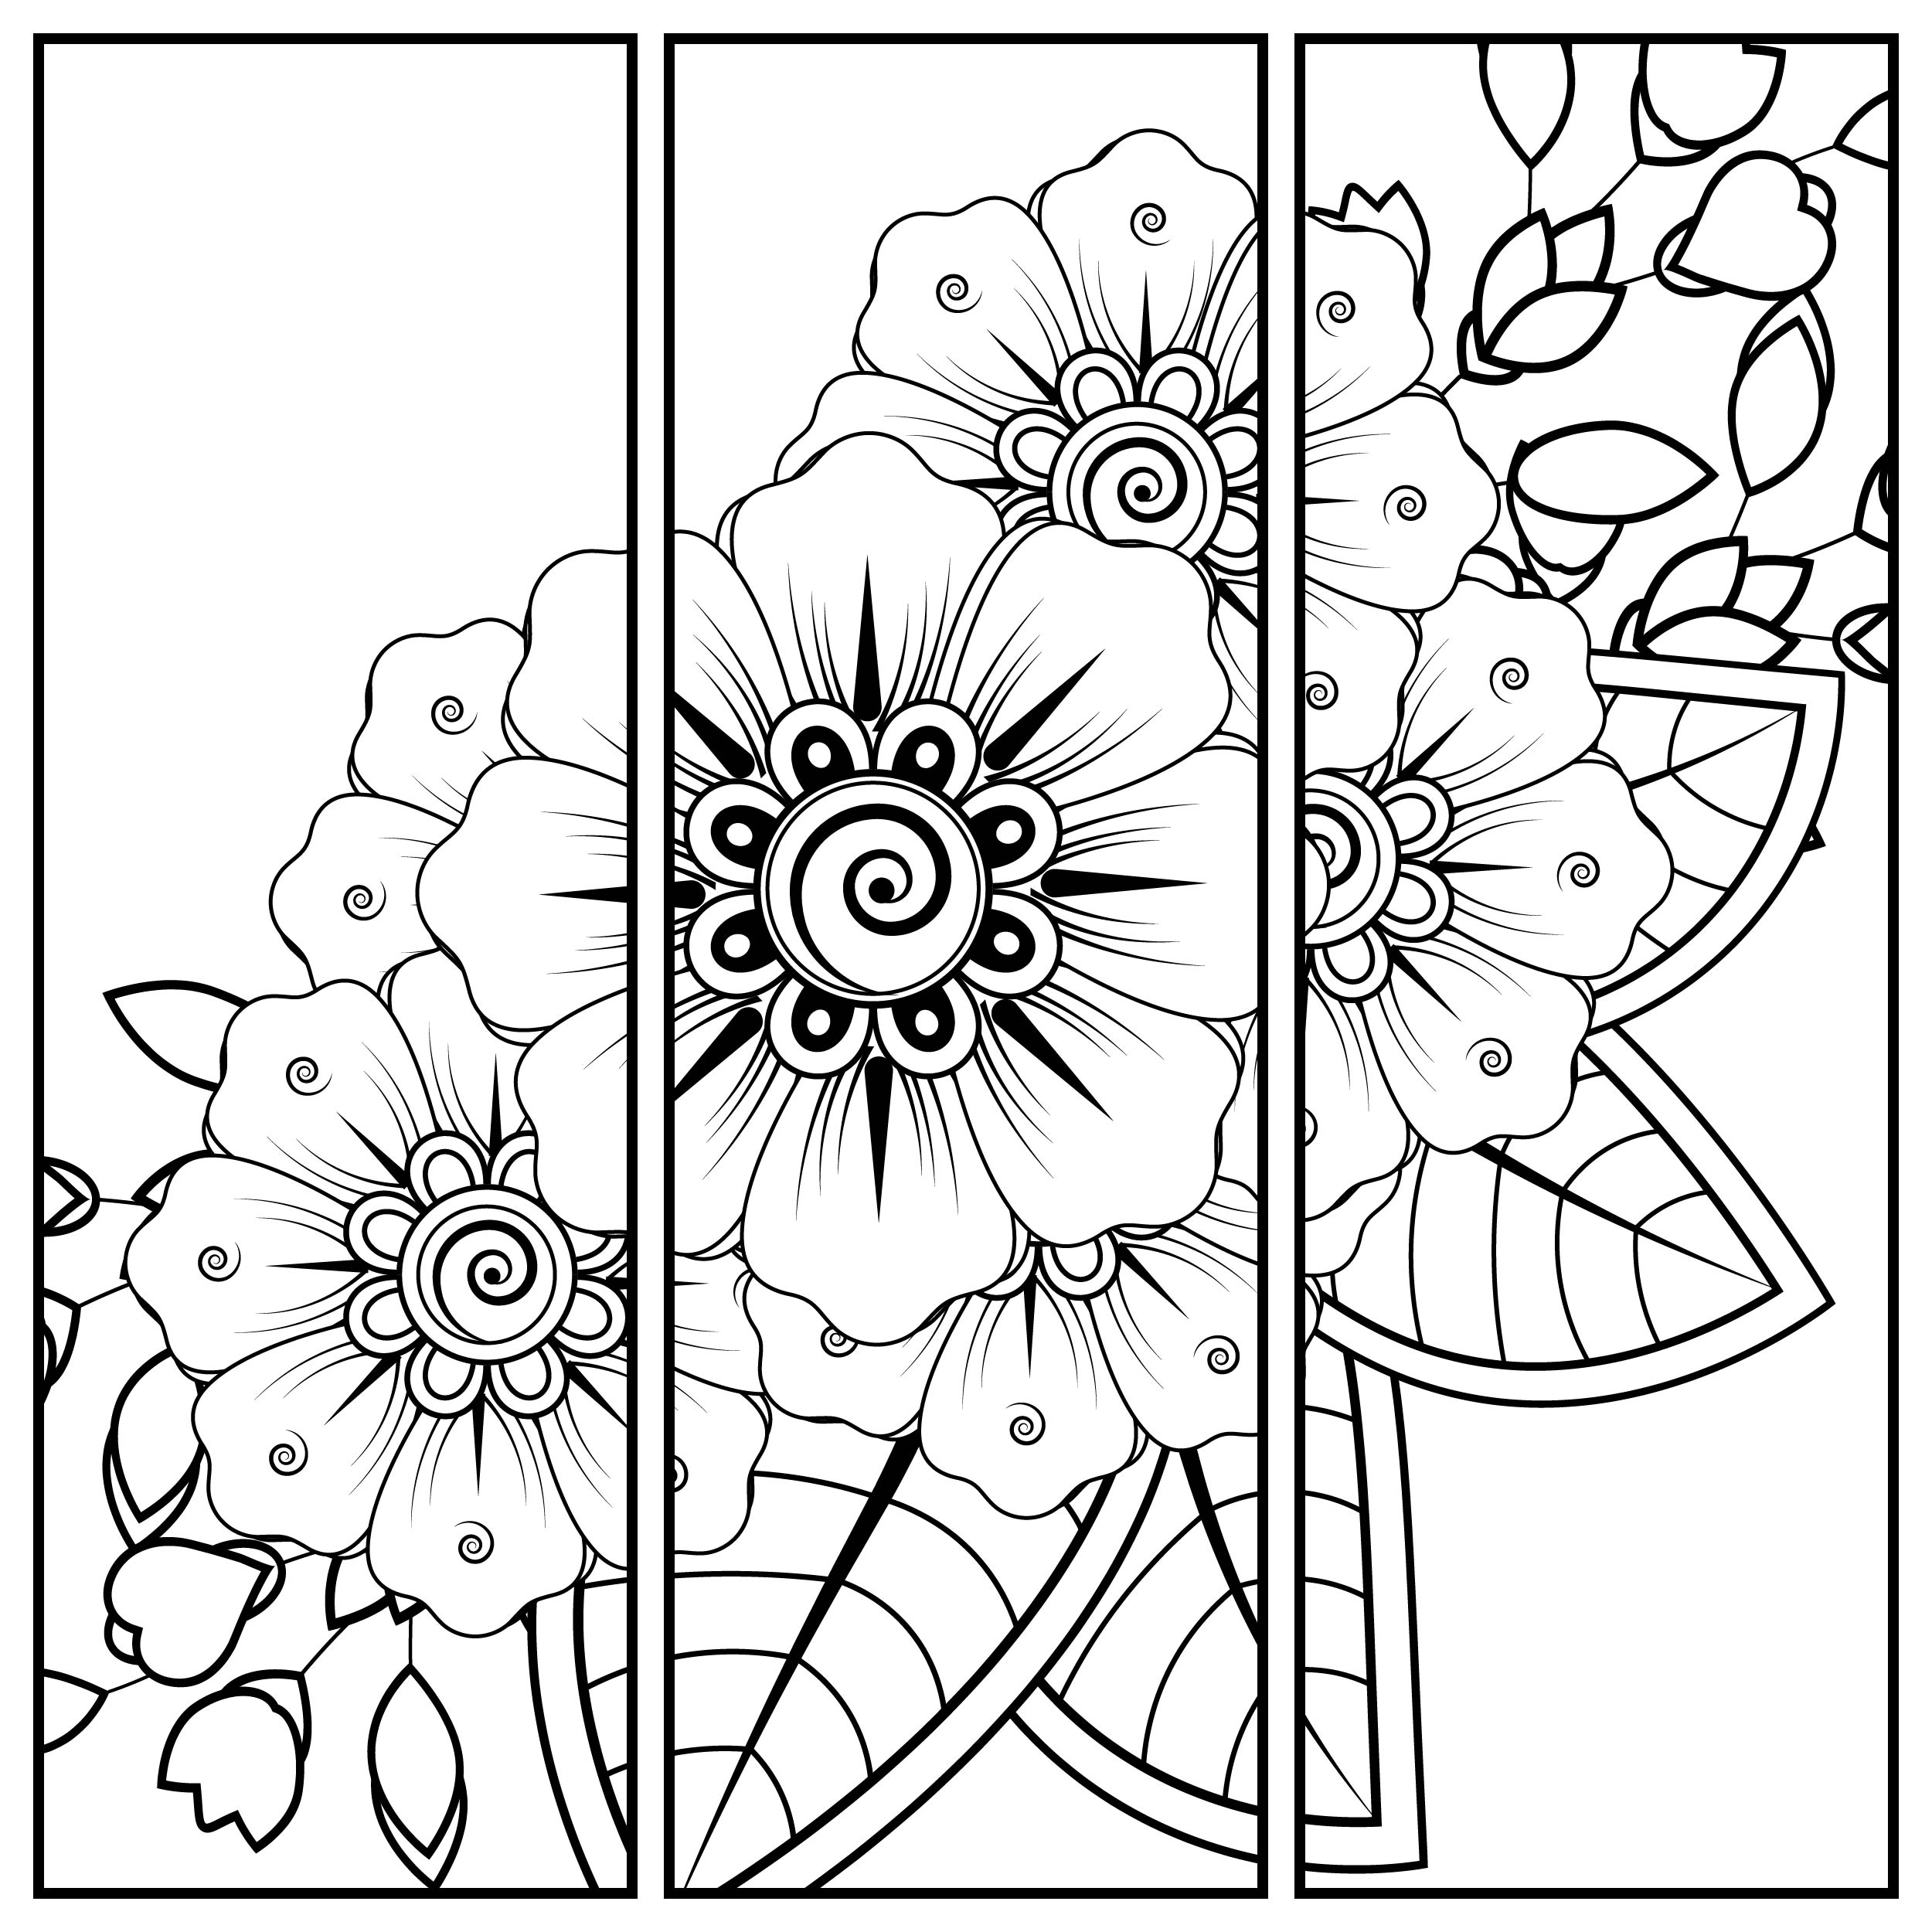 Coloring Book Outline Hand Draw – Online Coloring Page – HiColoring.com